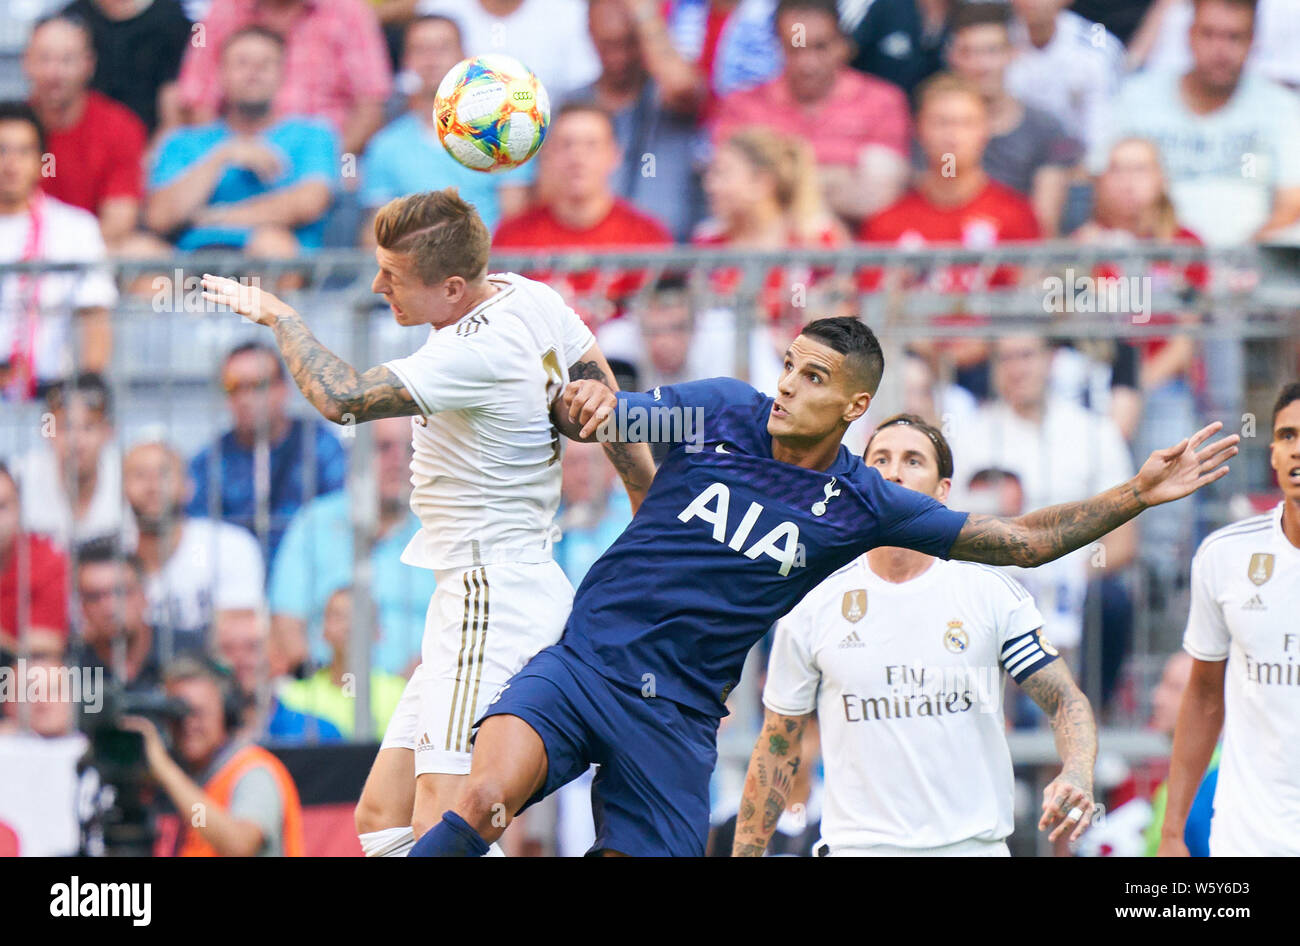 Munich, Germany. 30th July, 2019. Toni KROOS, Real Madrid 8 compete for the ball, tackling, duel, header, zweikampf, action, fight against Erik LAMELA, Hotspurs 11 REAL MADRID - TOTTENHAM HOTSPURS AUDI CUP 2019, A l l i a n z A r e n a Munich, July 30, 2019 Season 2019/2020, Credit: Peter Schatz/Alamy Live News Stock Photo